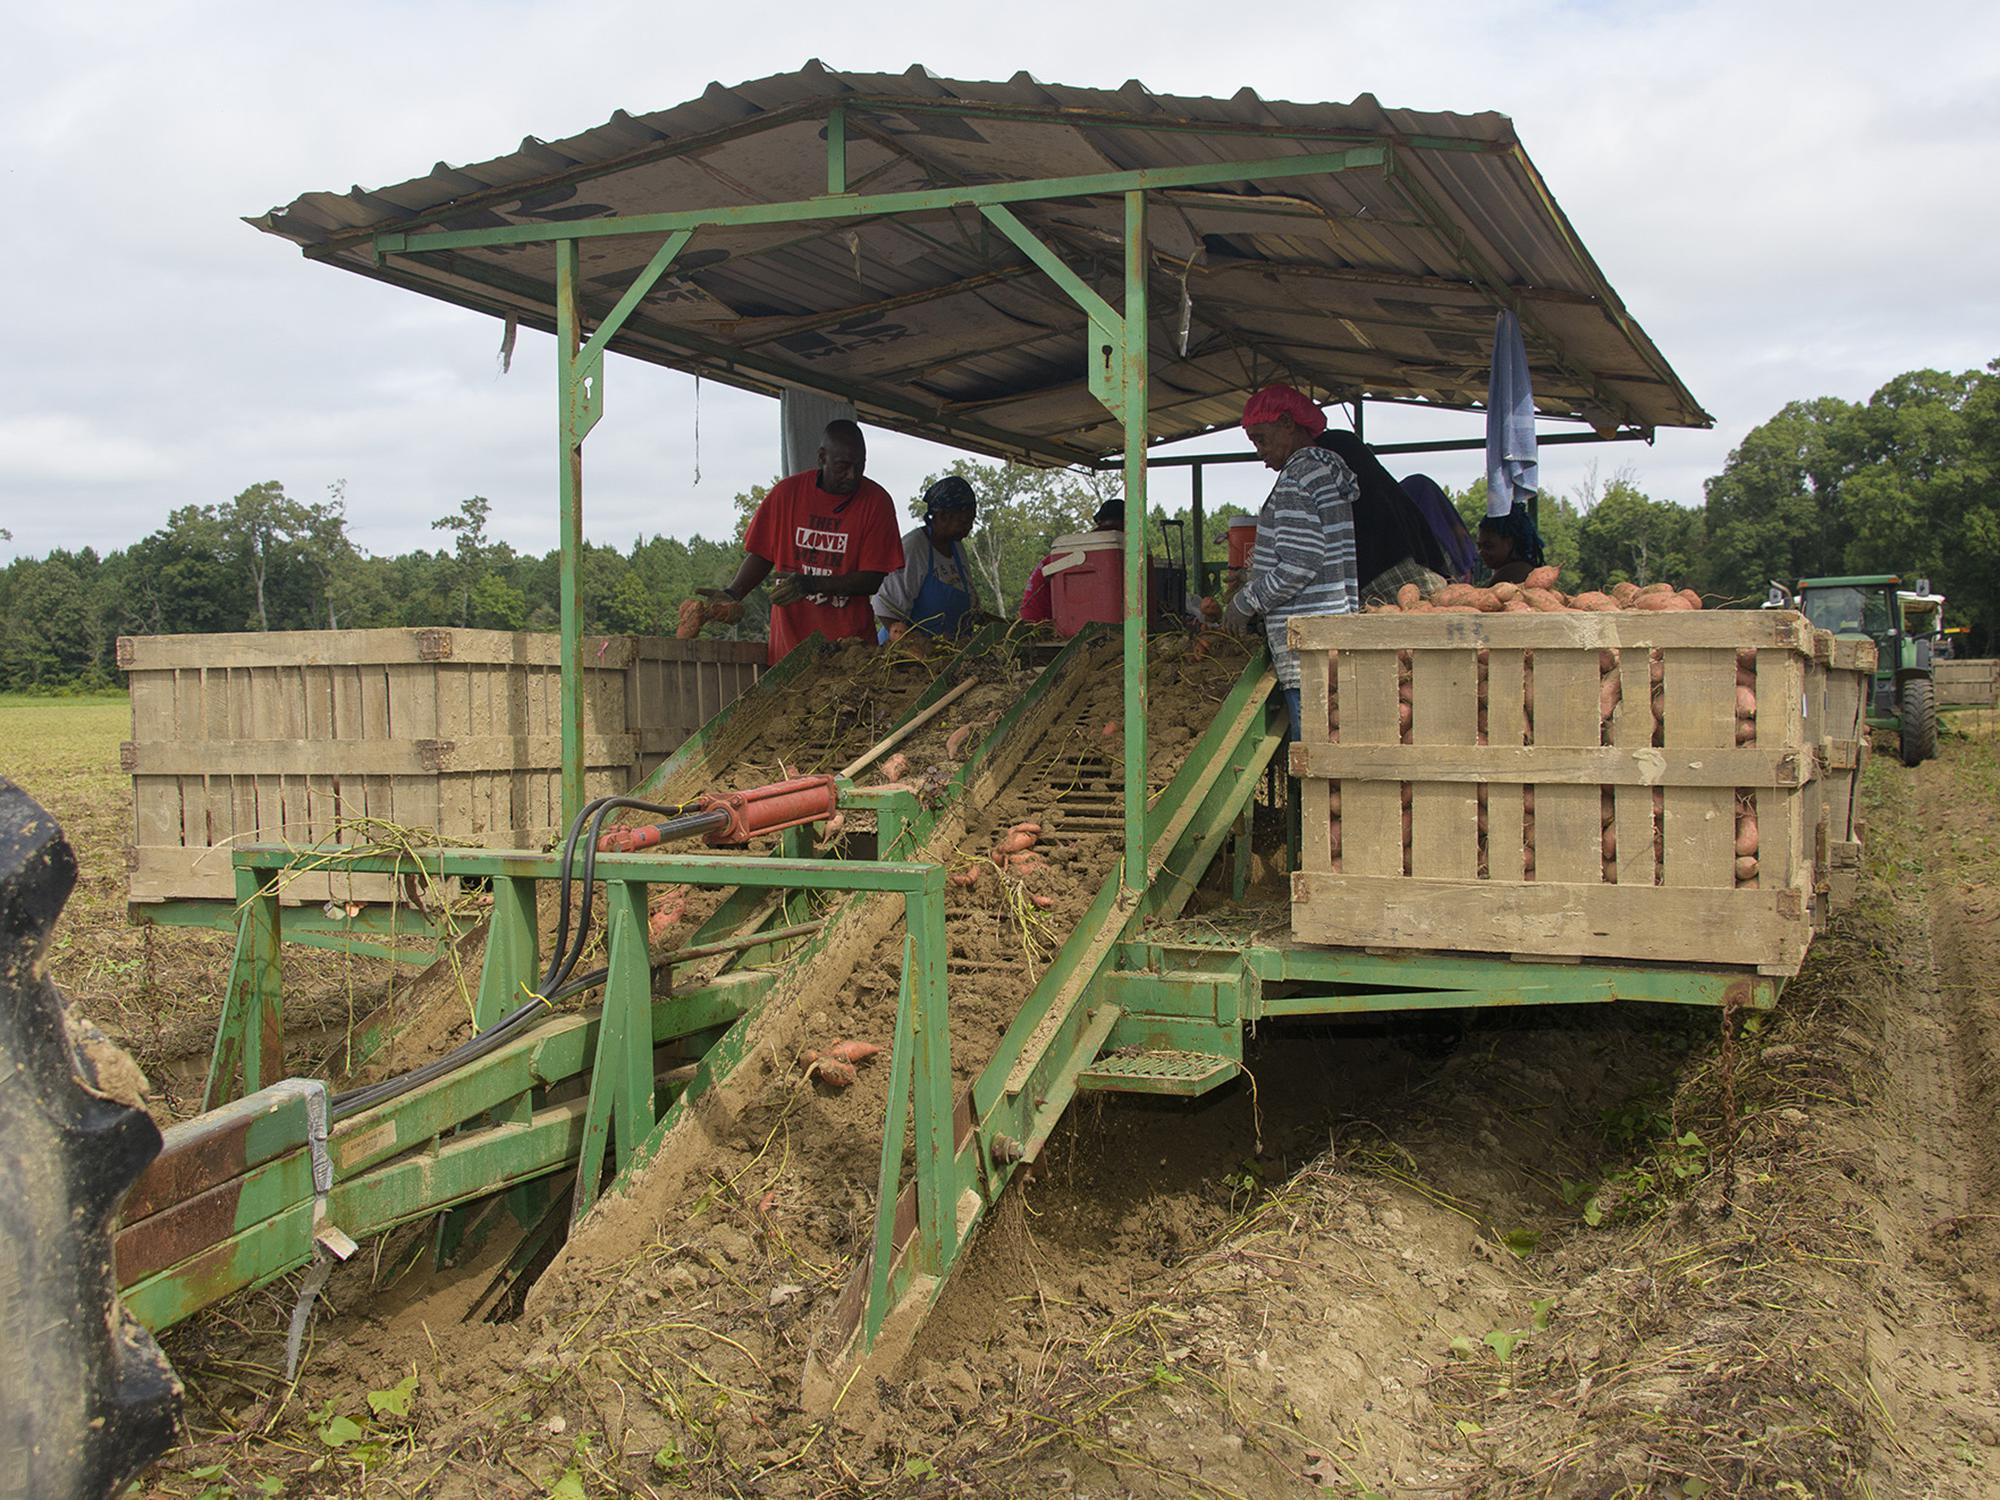 A covered trailer in a field with six workers sorting sweet potatoes into large, wooden crates along the trailer’s edges.